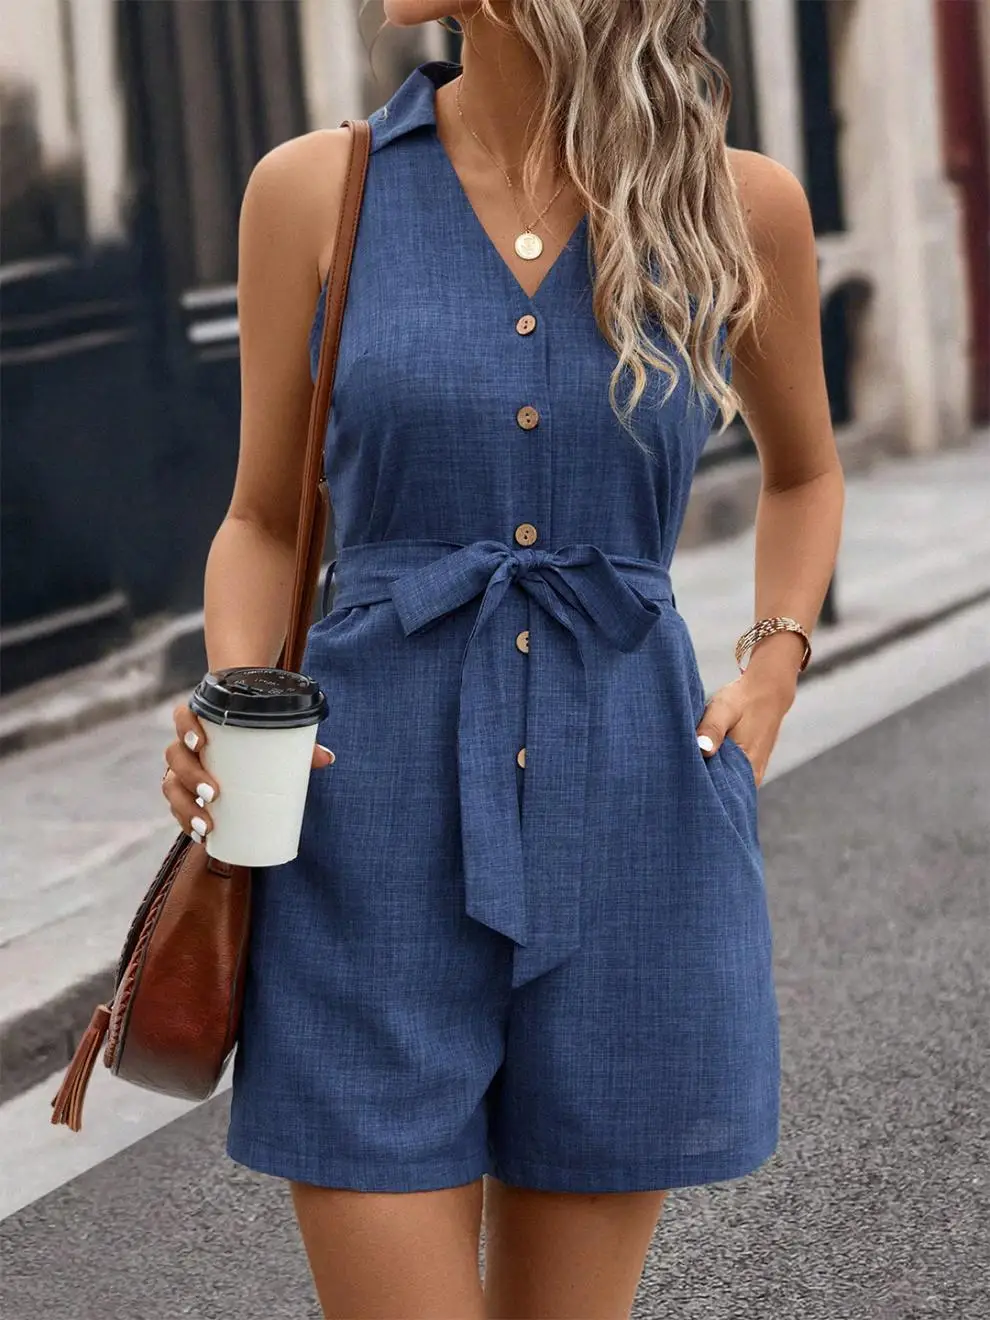 Women-Denim-Blue-Jumpsuit-And-Rompers-Sleeveless-Button-V-neck-Casual-Jumpsuits-For-Women-s-Fashion-2